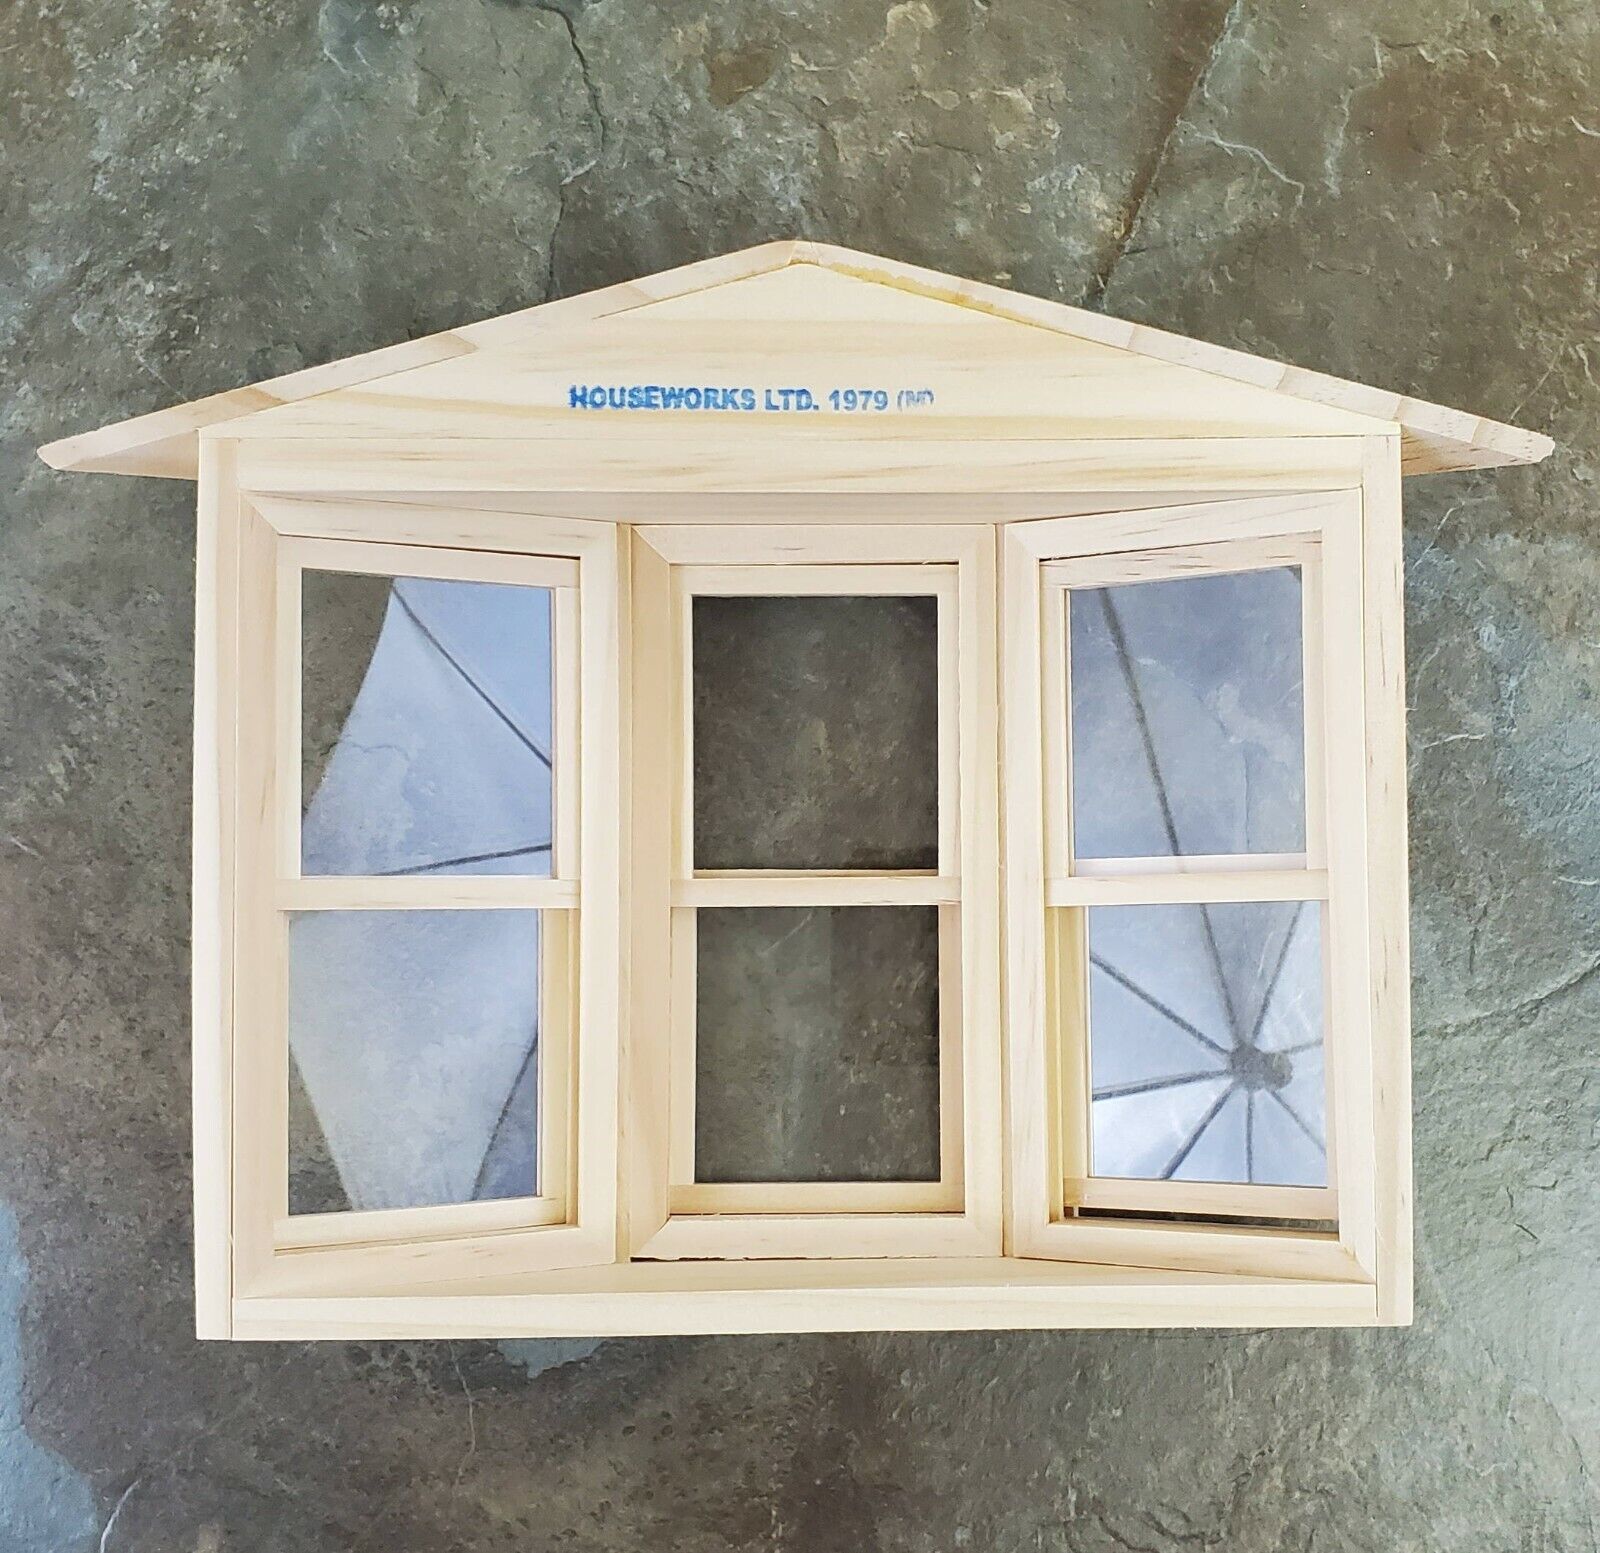 Dollhouse Miniature 3 Bay Window Working Large 1:12 Scale Houseworks 5020